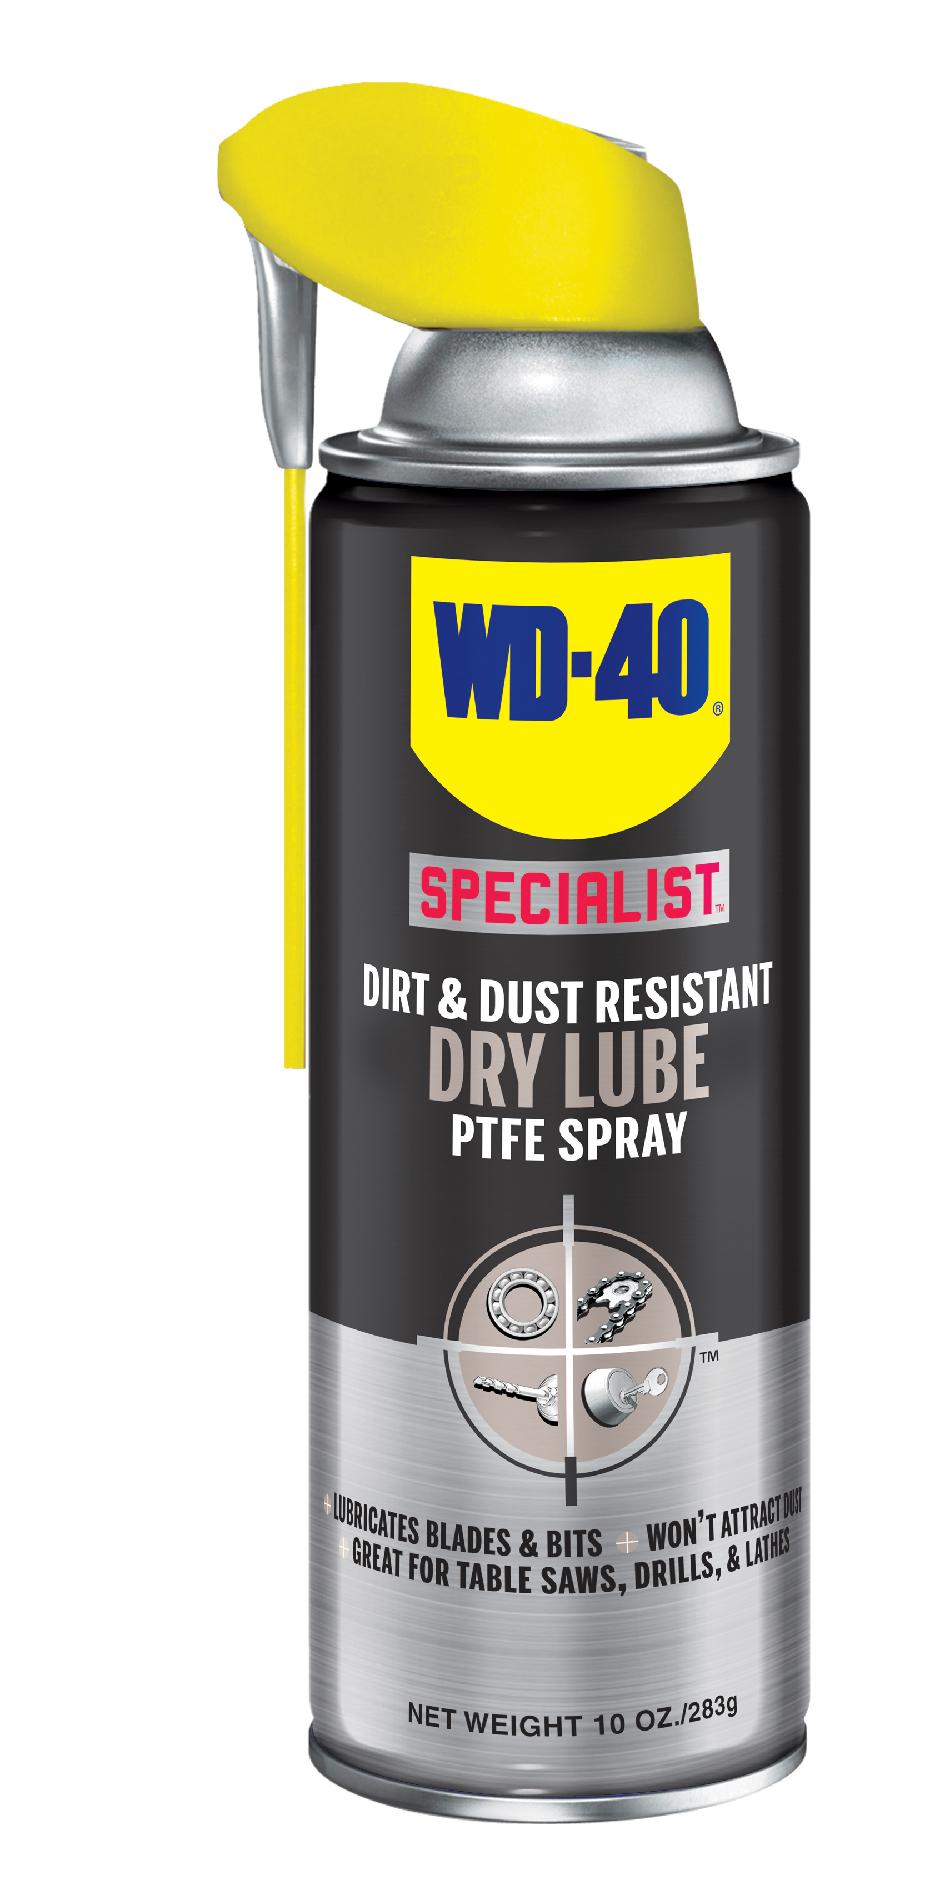 WD-40 Specialist Water Resistant Silicone Lubricant Spray, 11 Ounces (2 Pack)